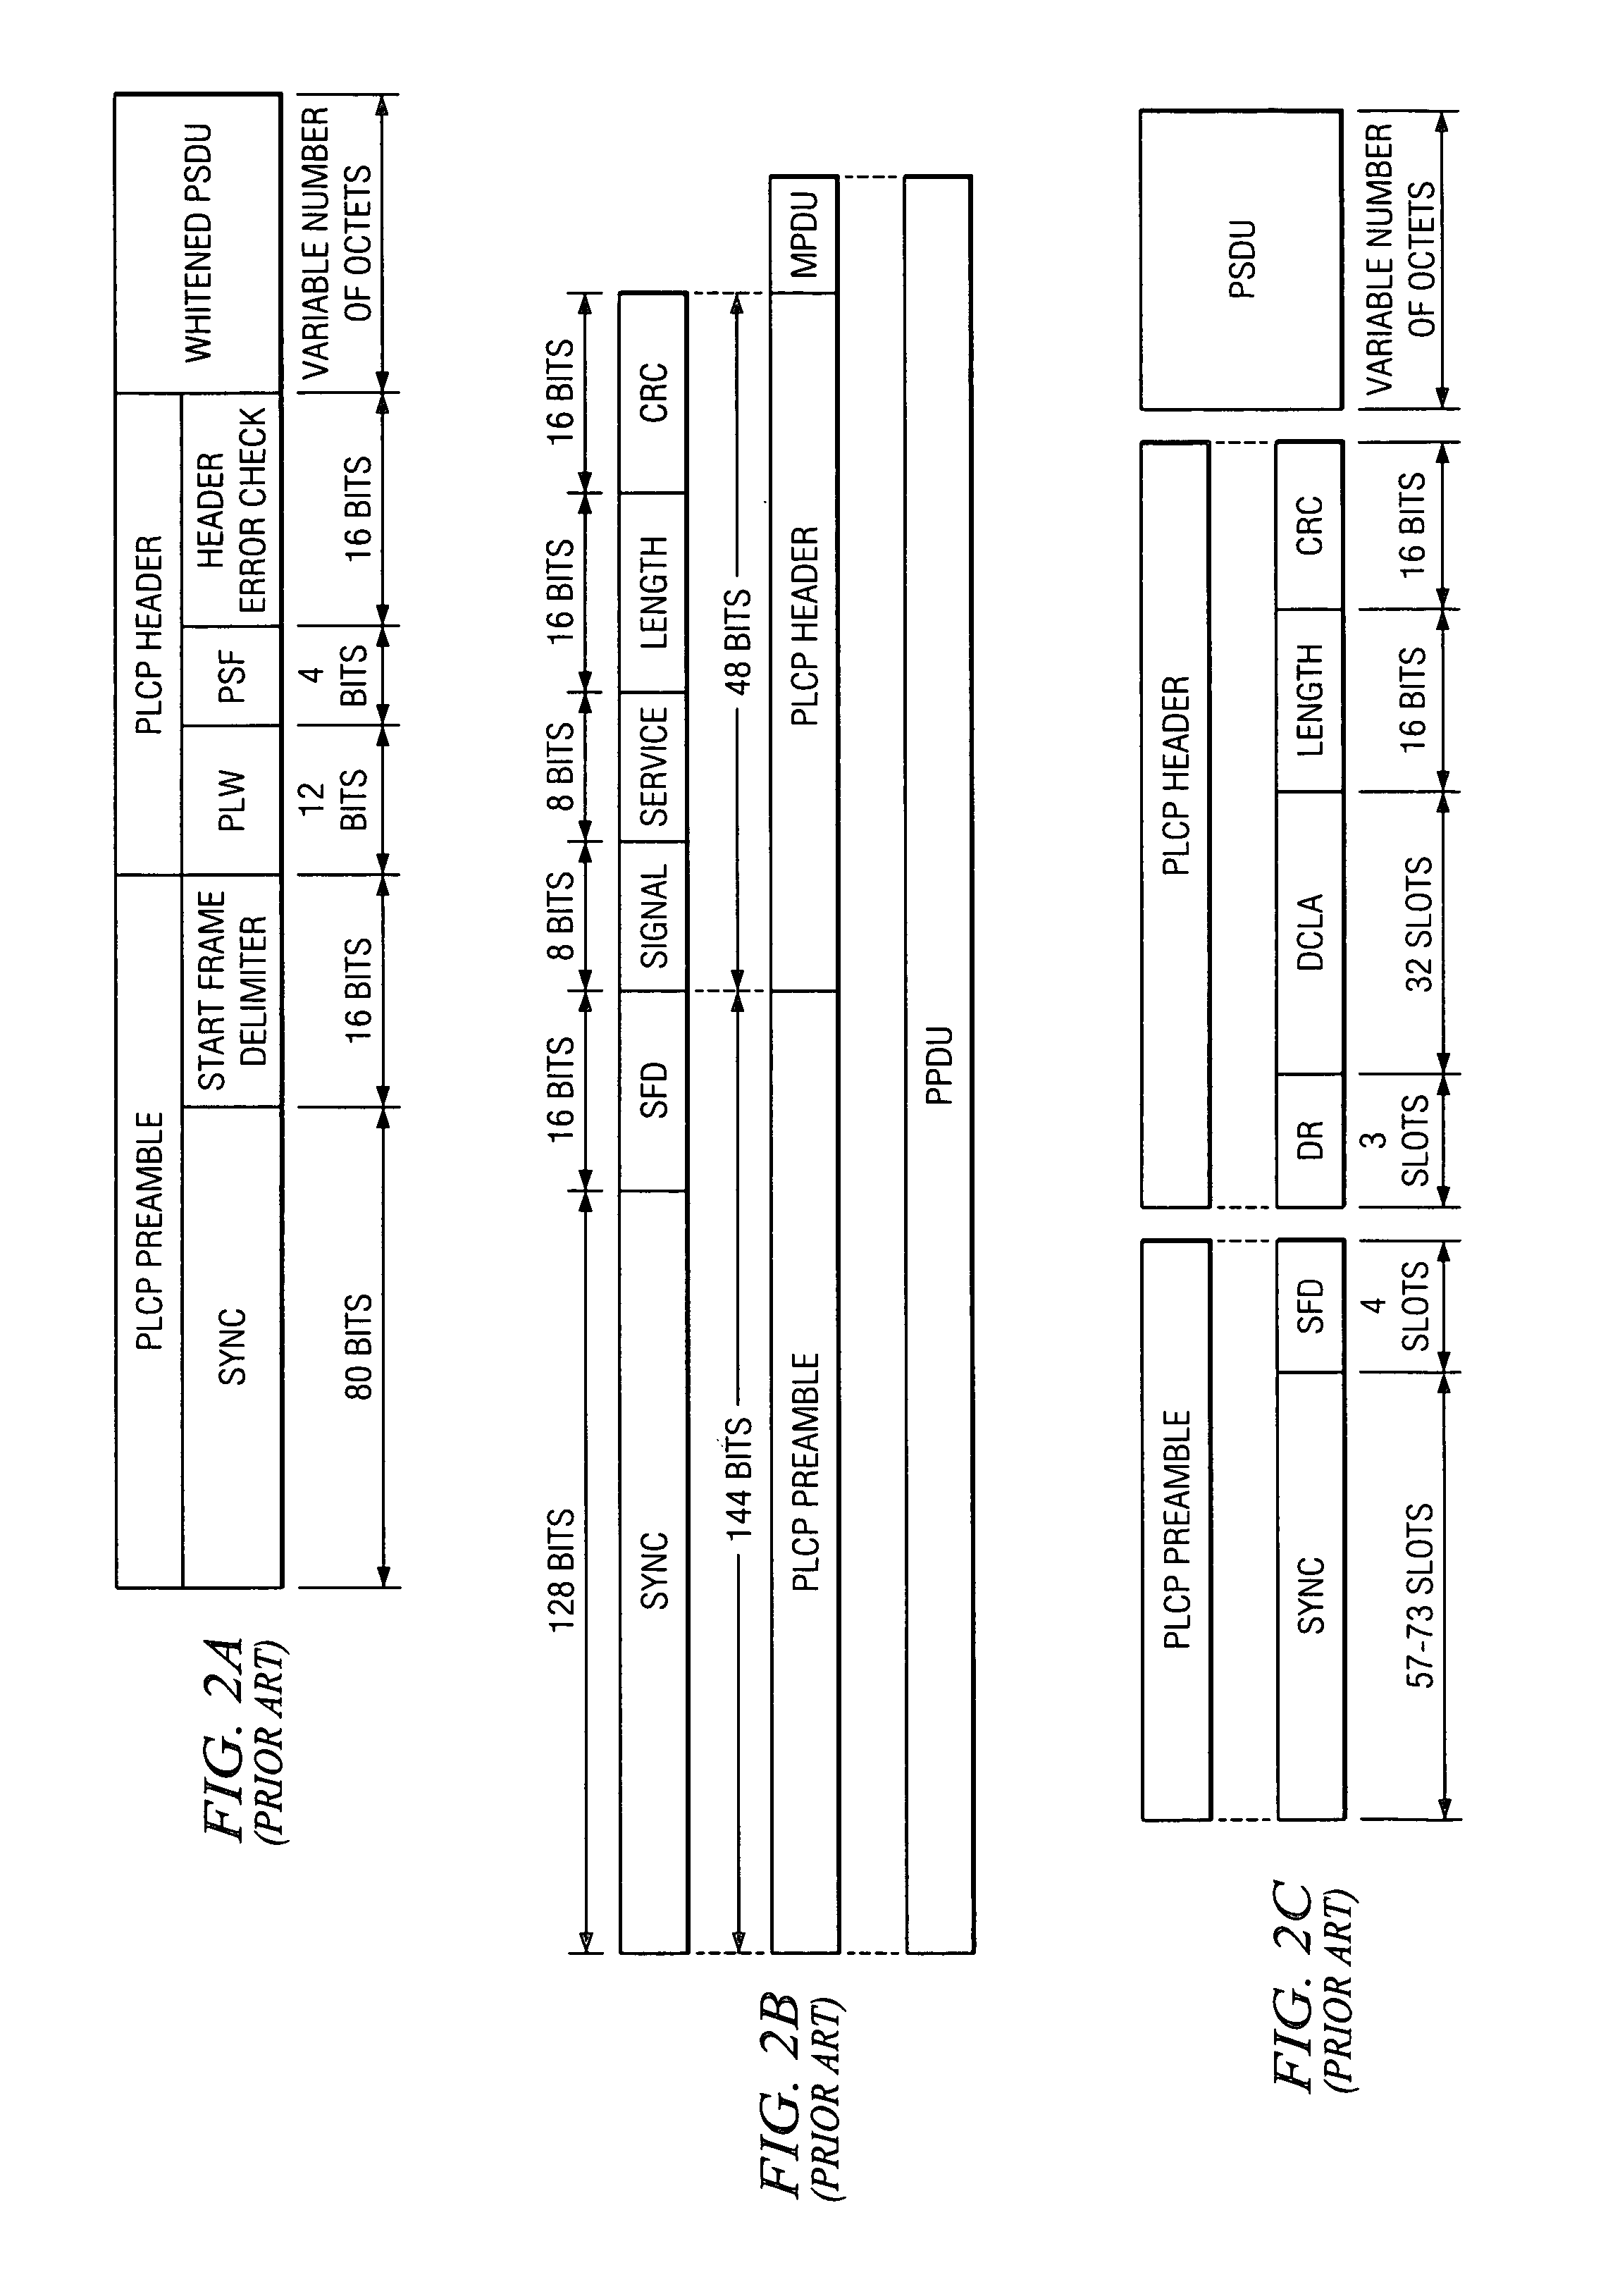 Virtual clear channel avoidance (CCA) mechanism for wireless communications